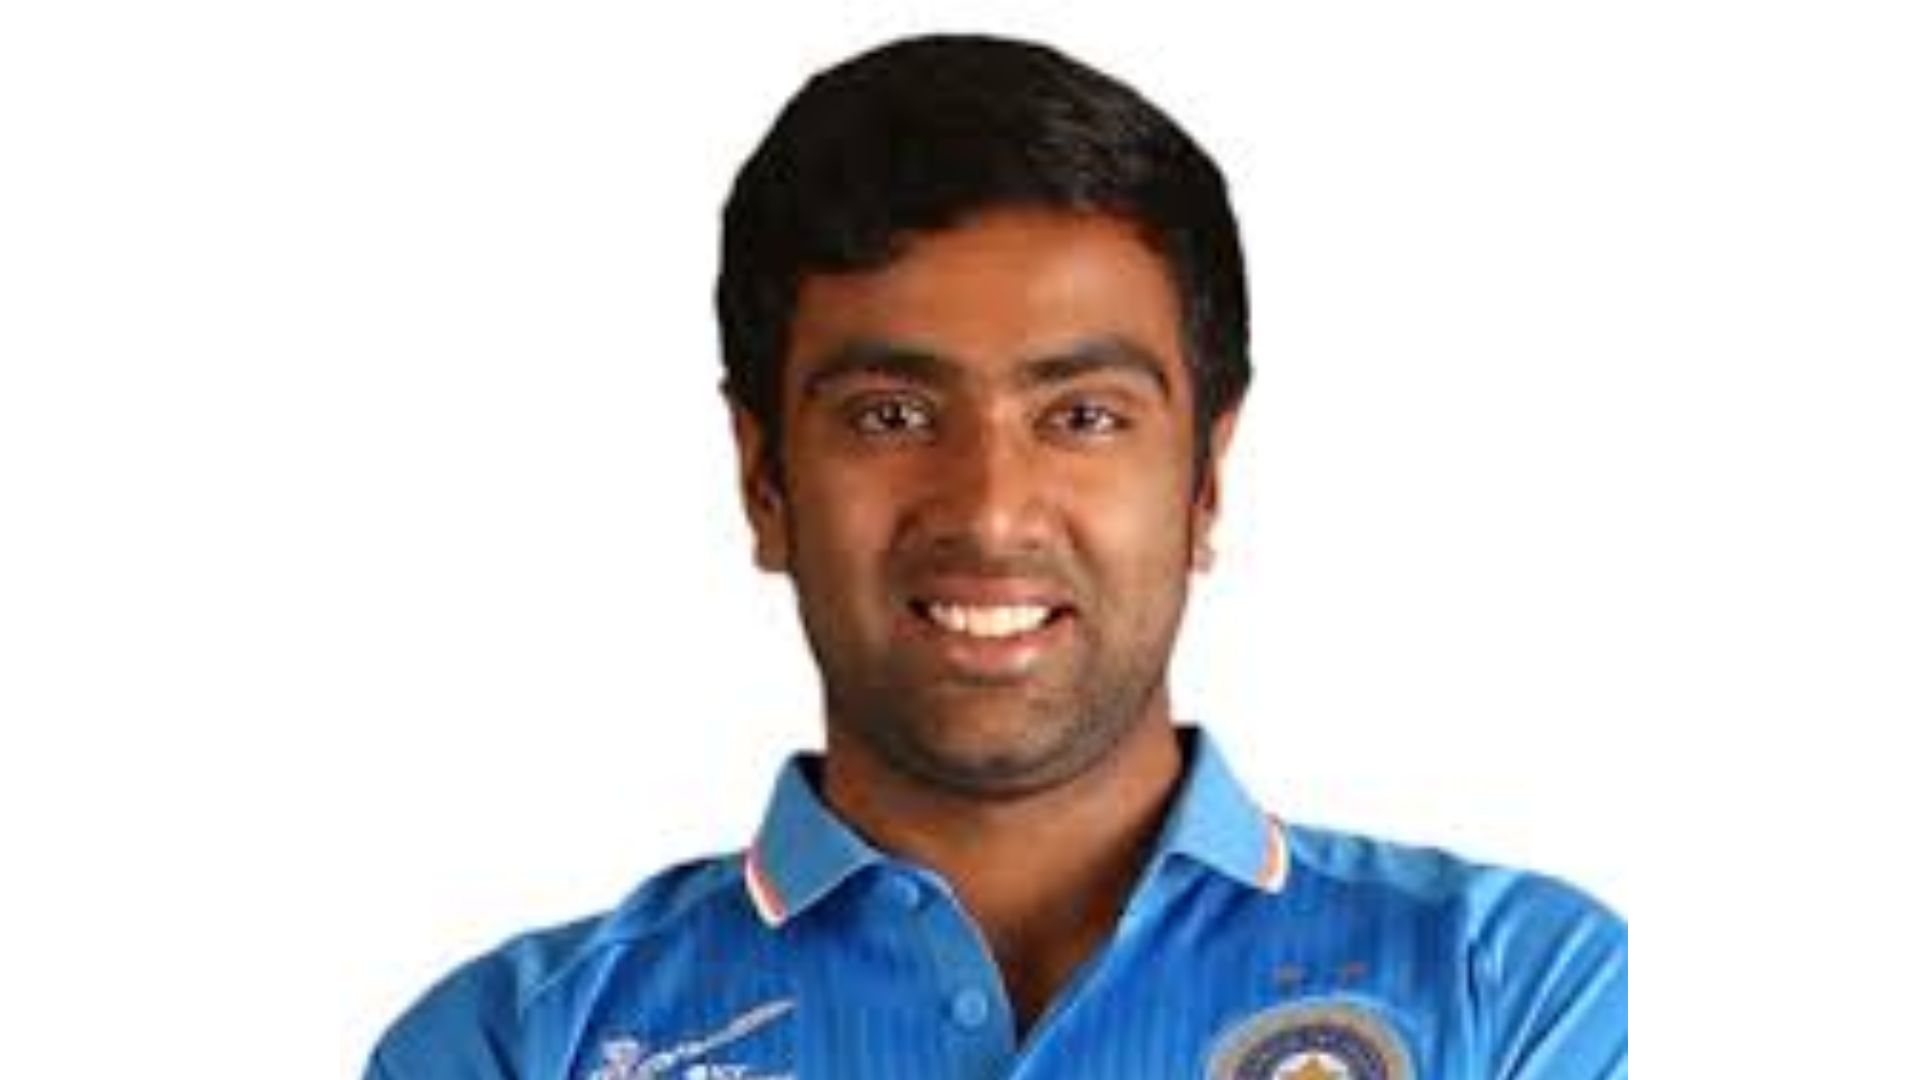 R Ashwin Expresses gratitude to his well-wishers at achieving Test cricket milestone of 500 wickets